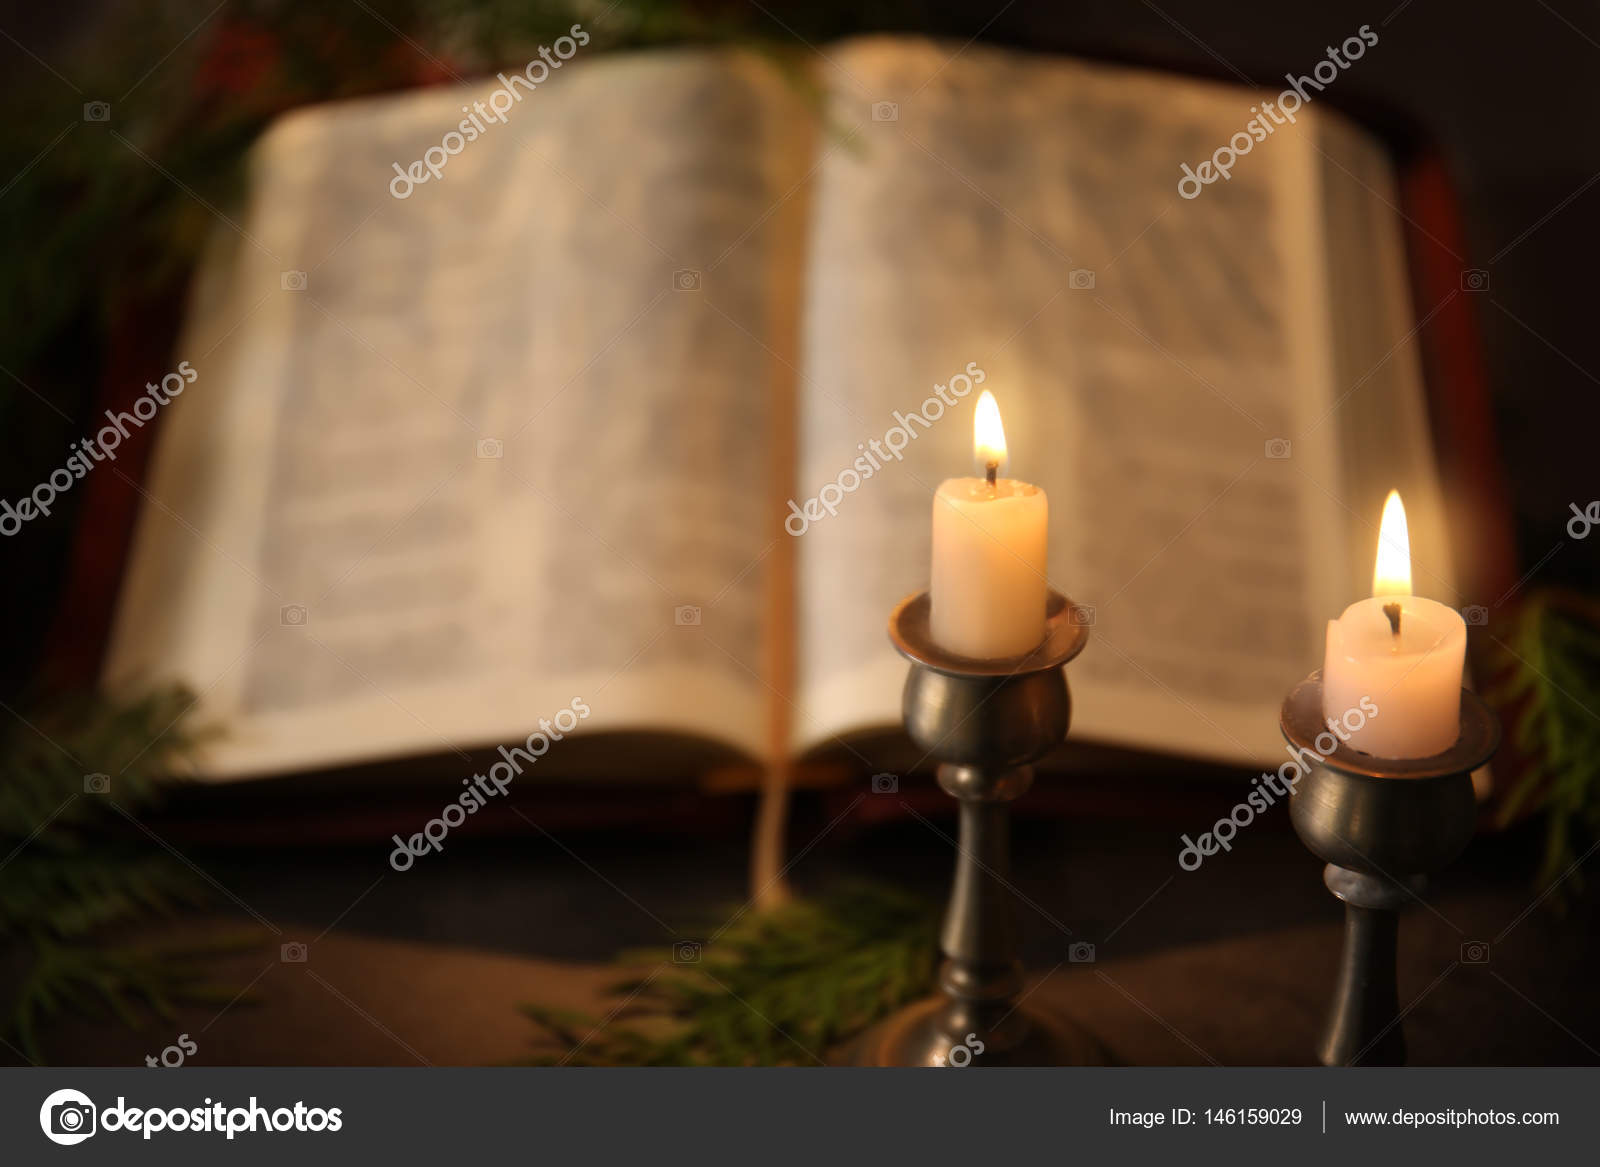 Images Of Open Bible With Candle